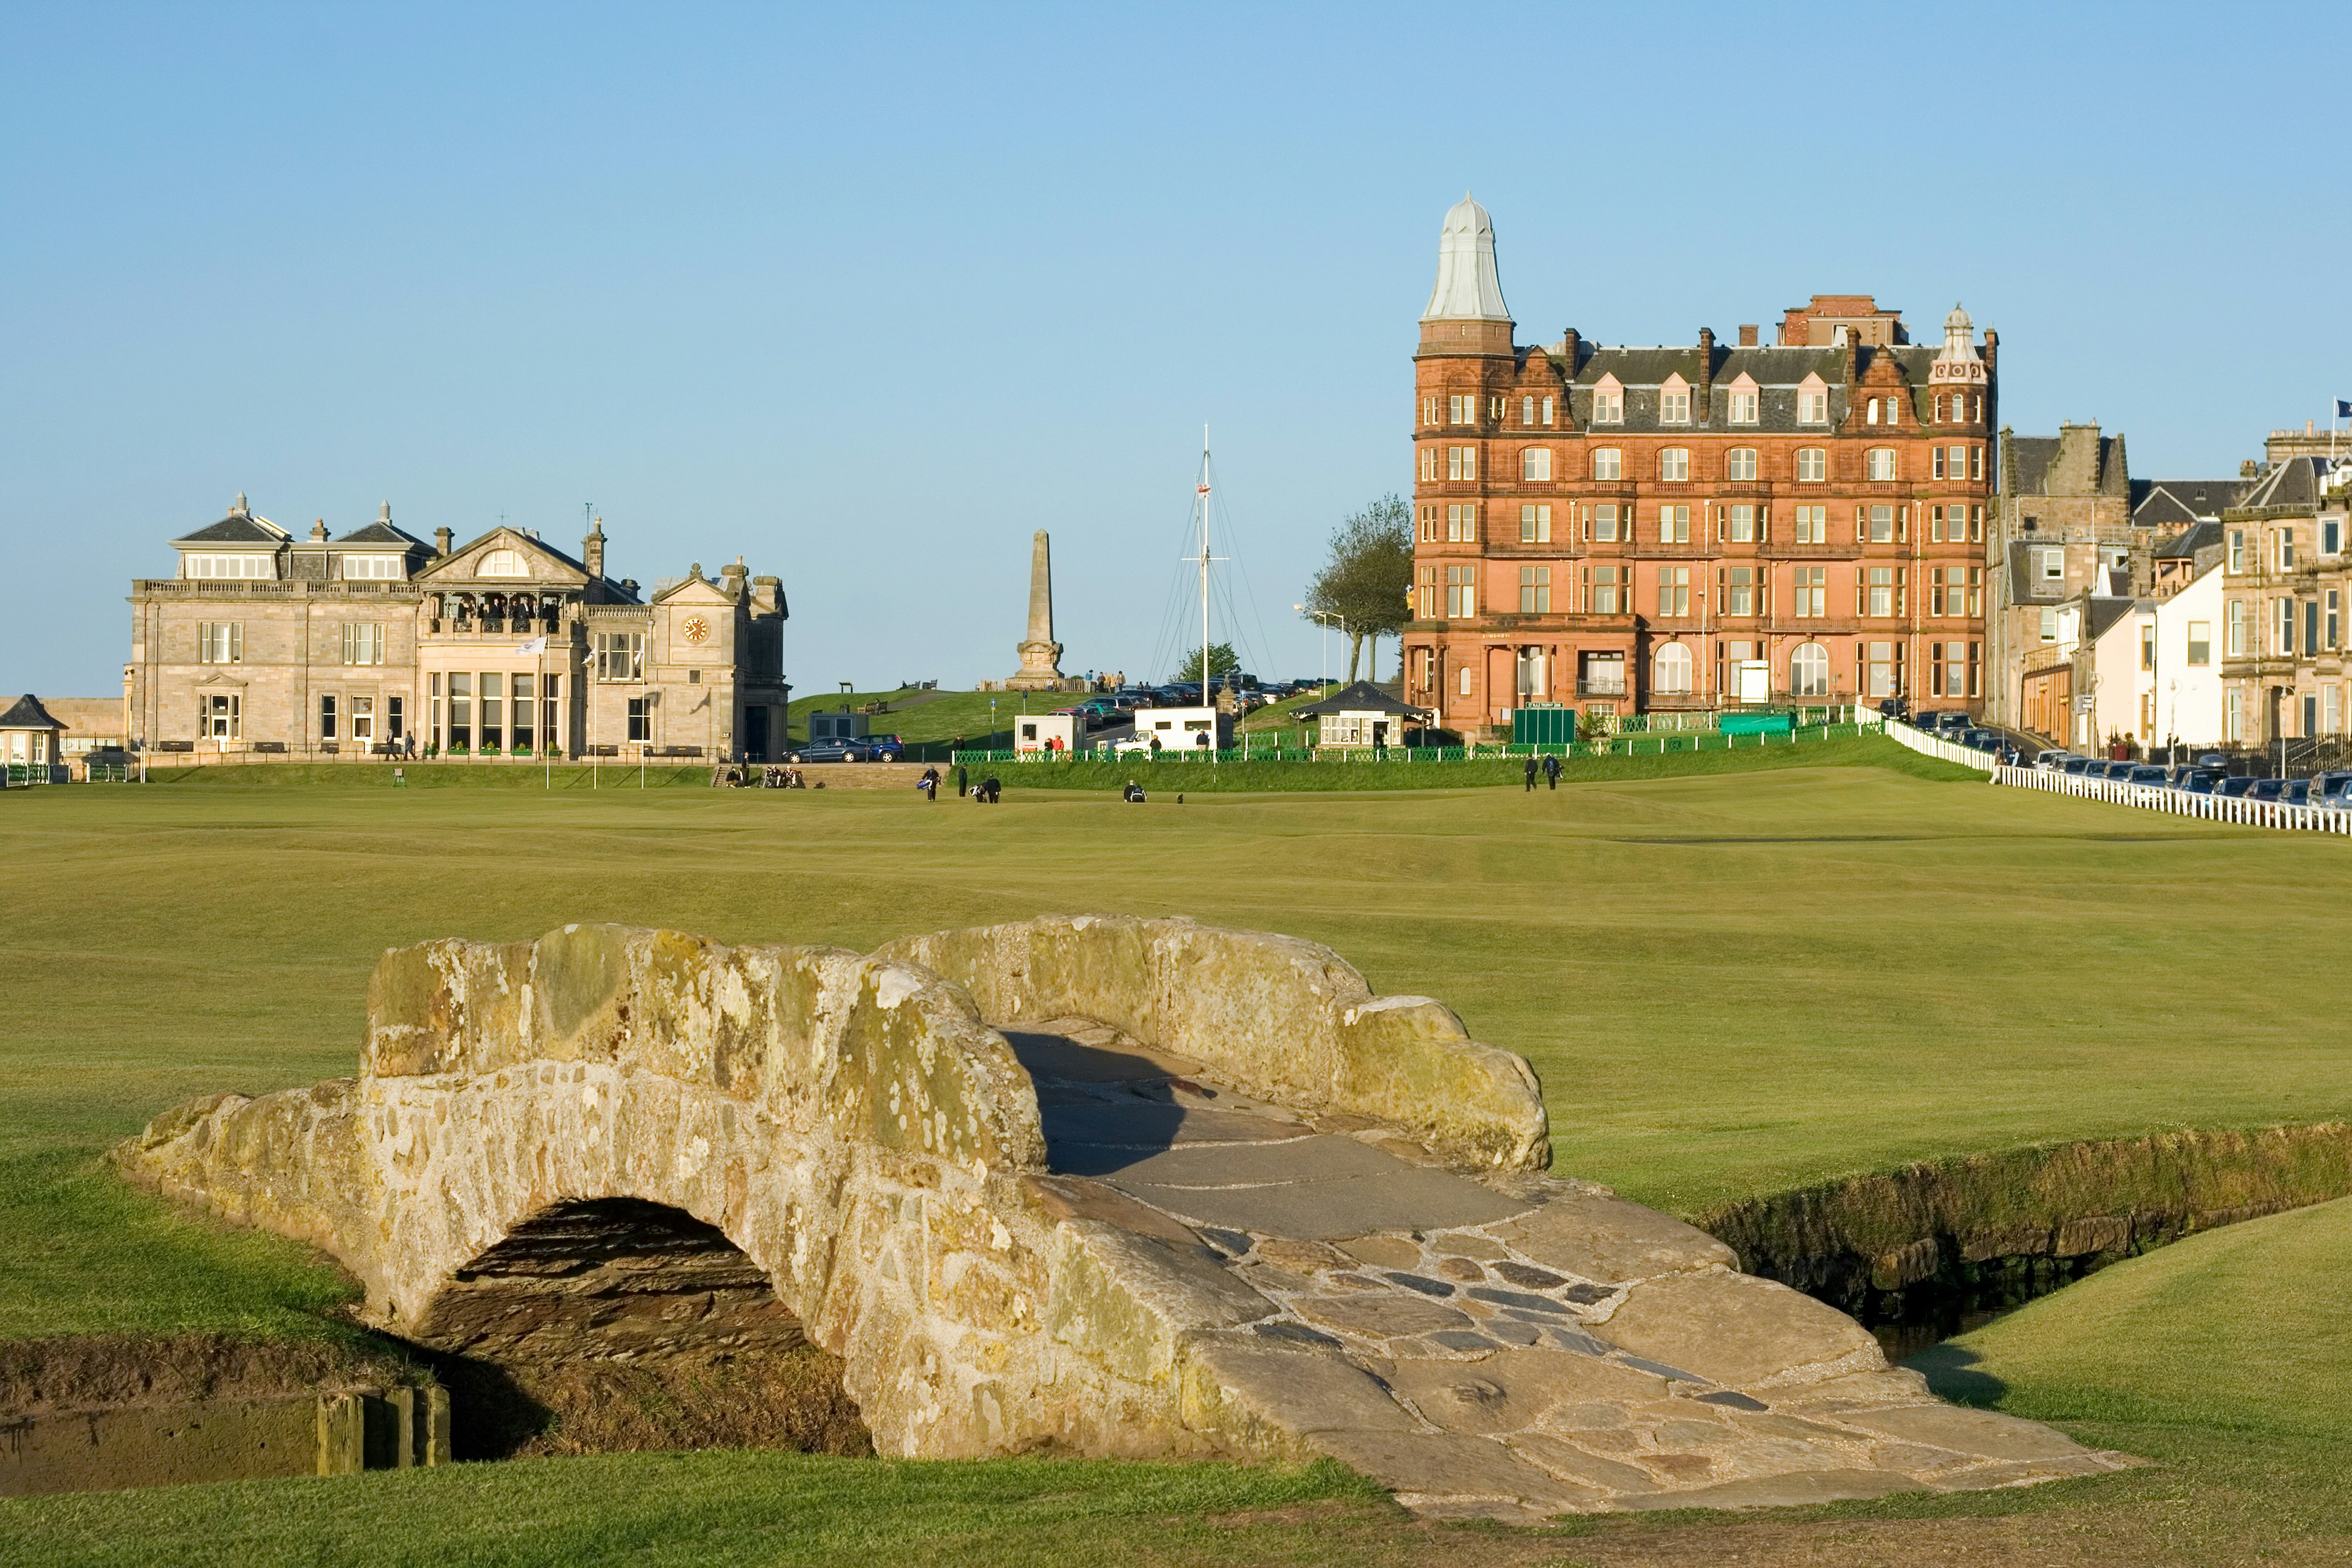 A stone bridge leads to the expansive greens of the St. Andrews Golf Course. In the background, there are a pair of old stone buildings. 